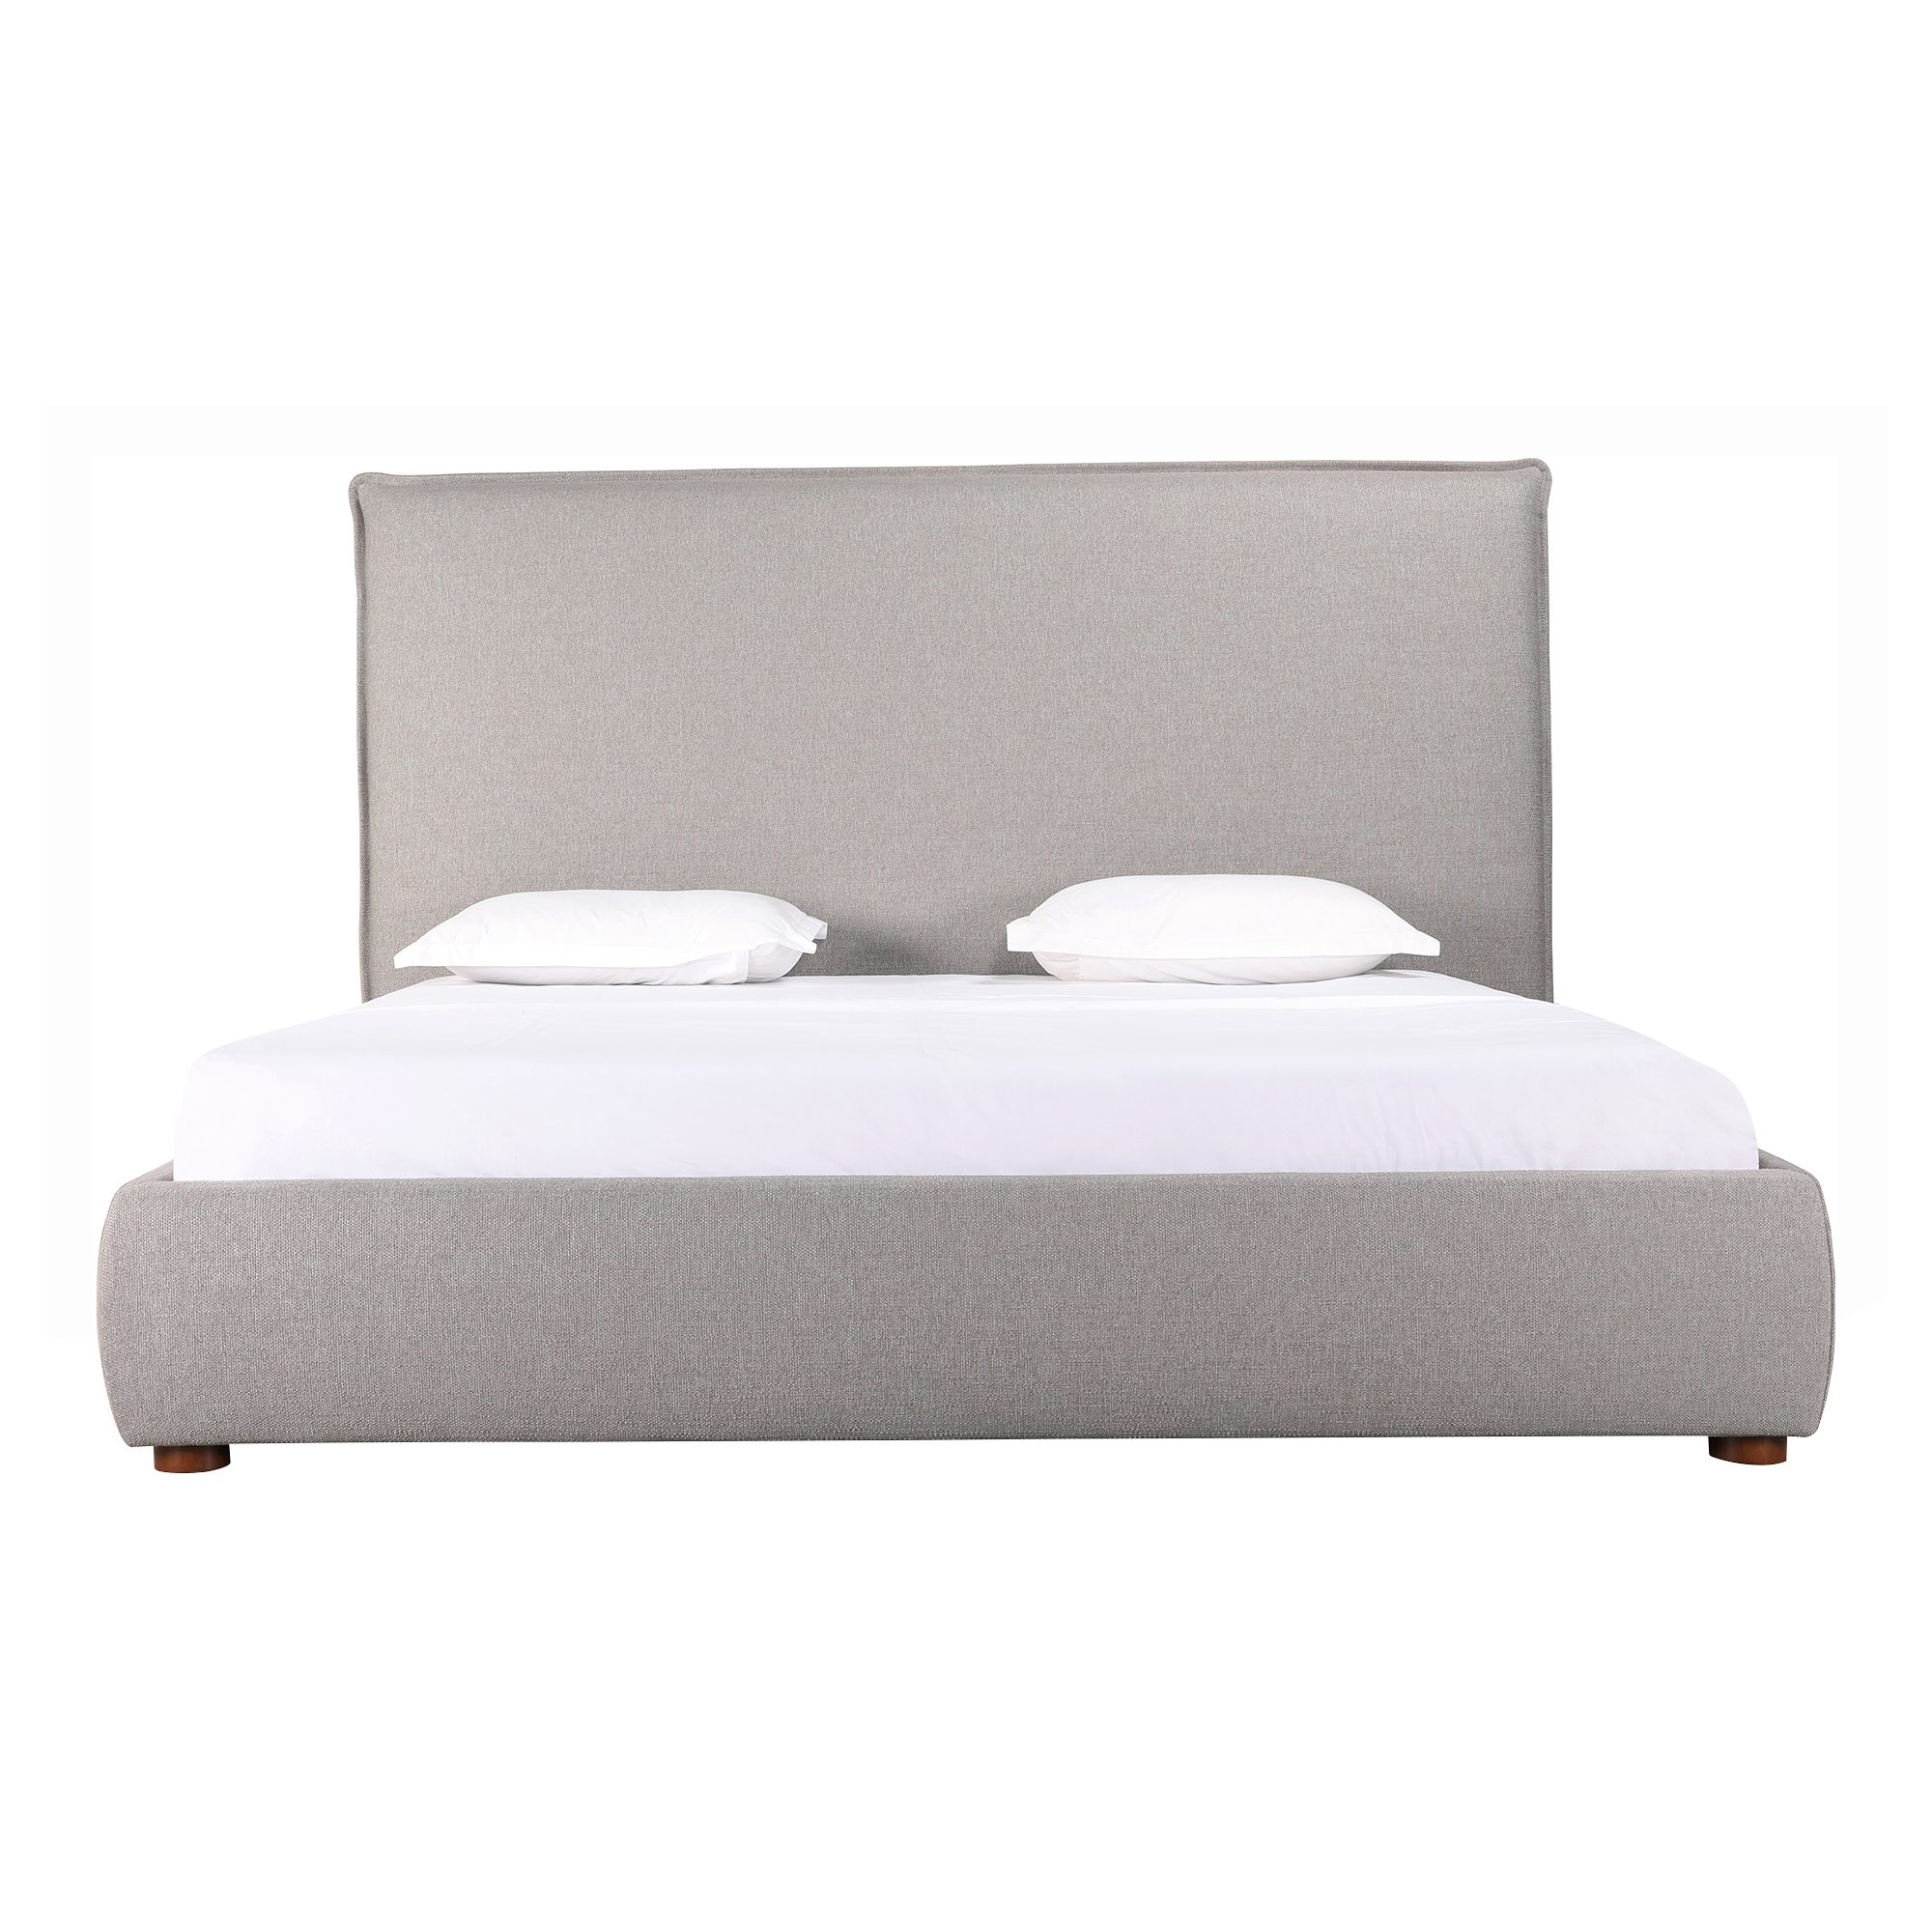 Luzon Queen Bed Tall Headboard Greystone - Image 1